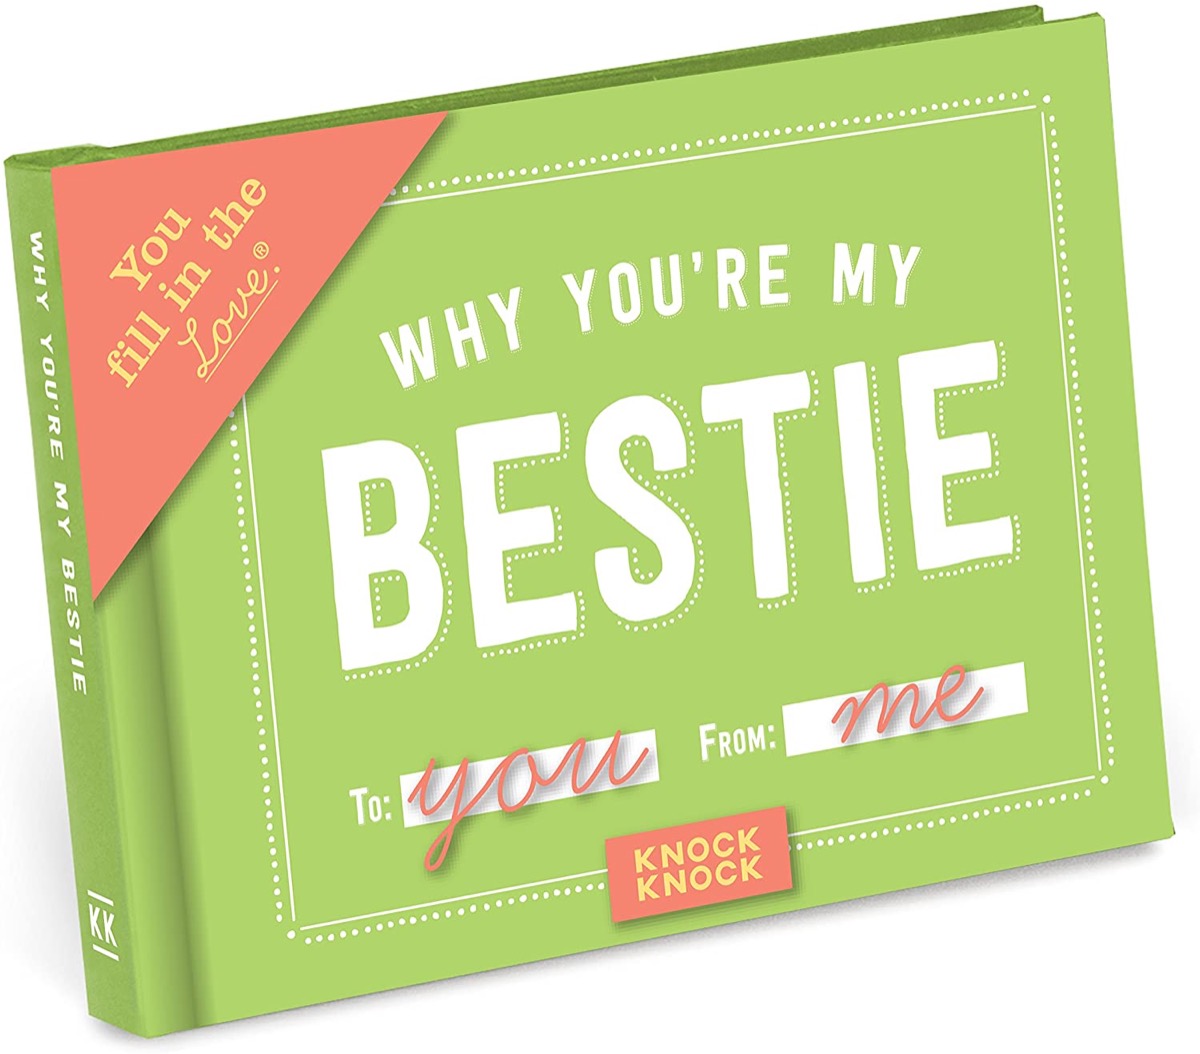 "Why You're My Bestie" book